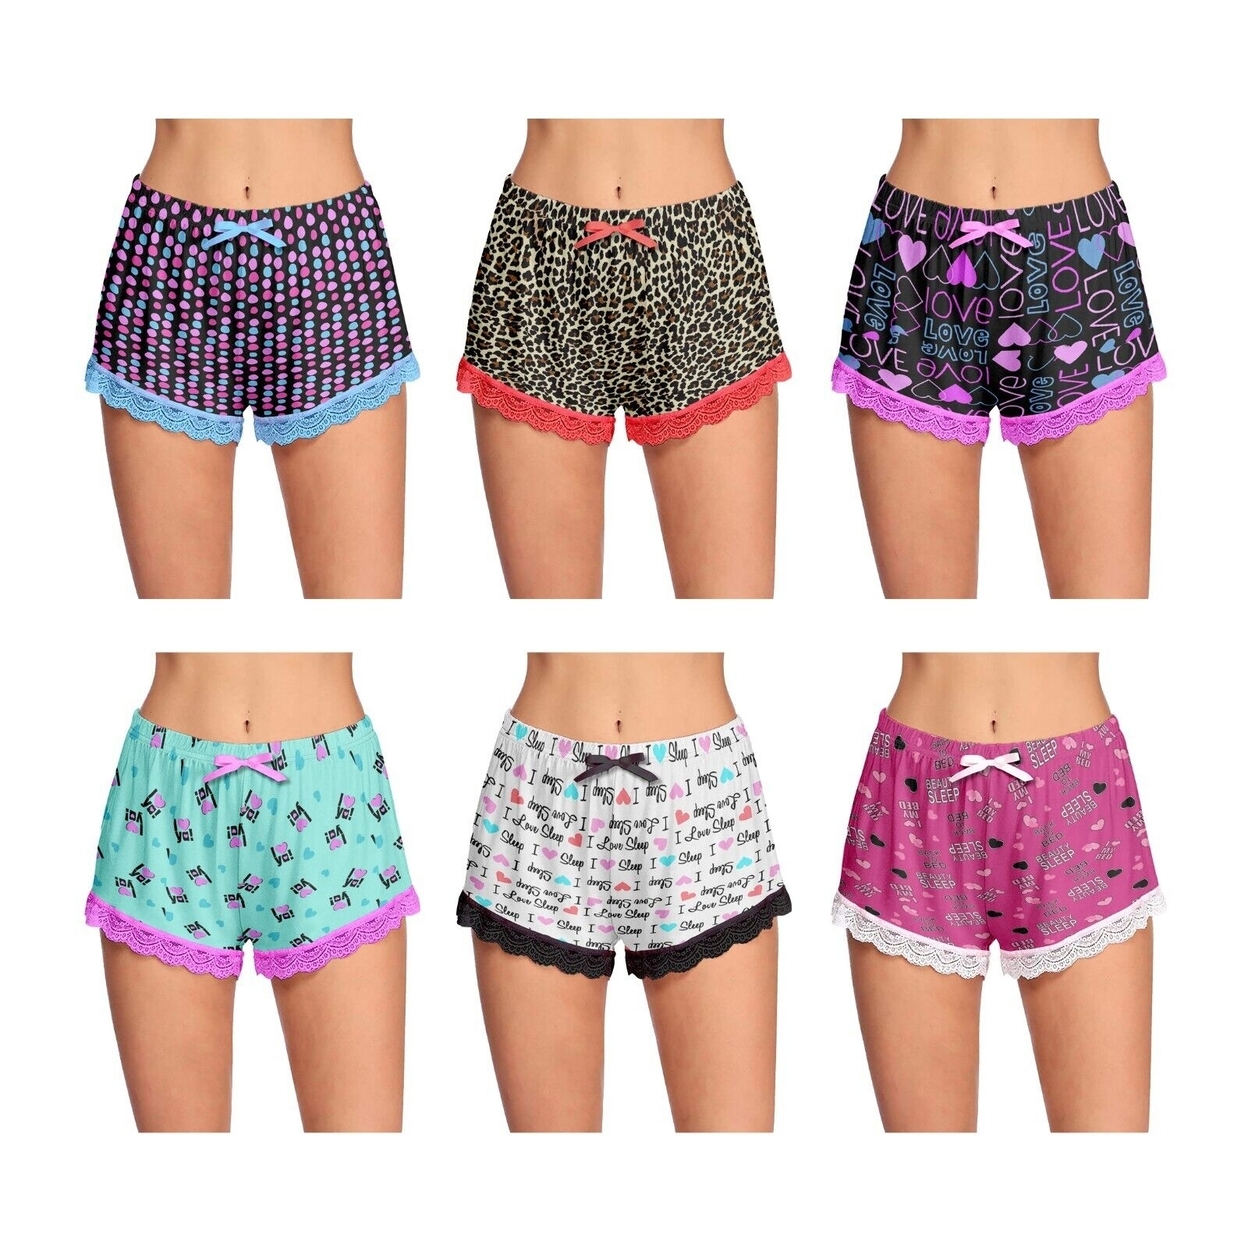 2-Pack: Women's Ultra-Soft Cozy Fun Printed Lace Trim Pajama Lounge Shorts - Small, Shapes